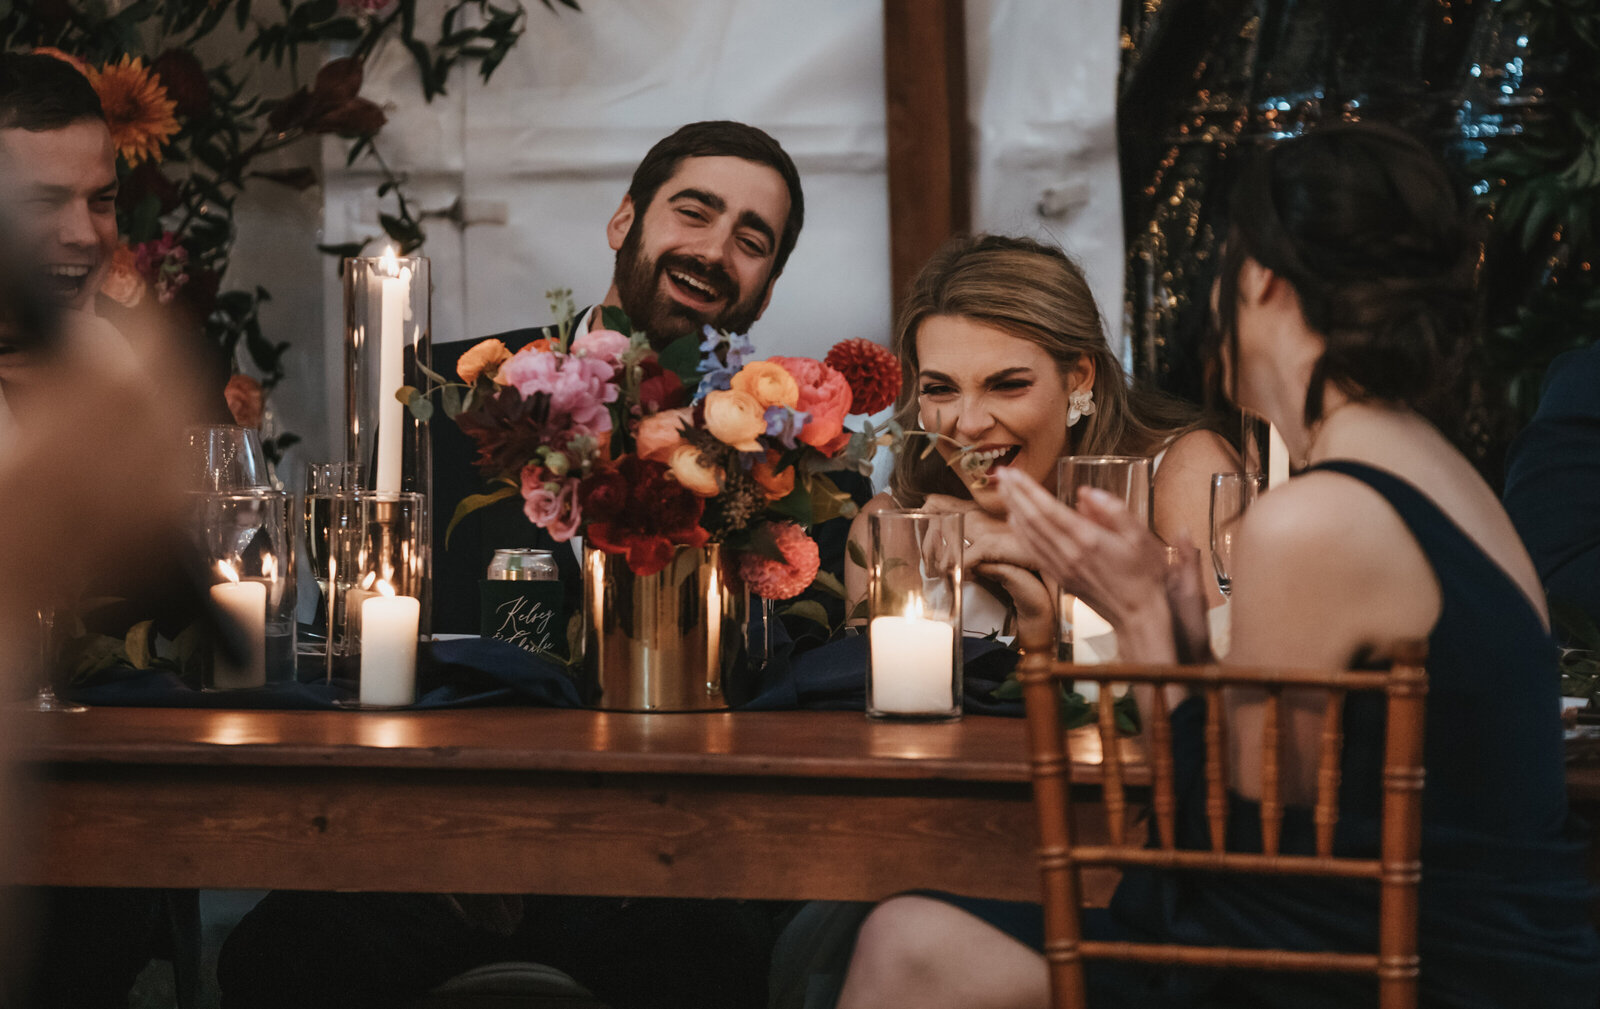 A bride and groom laugh during toasts at their wedding